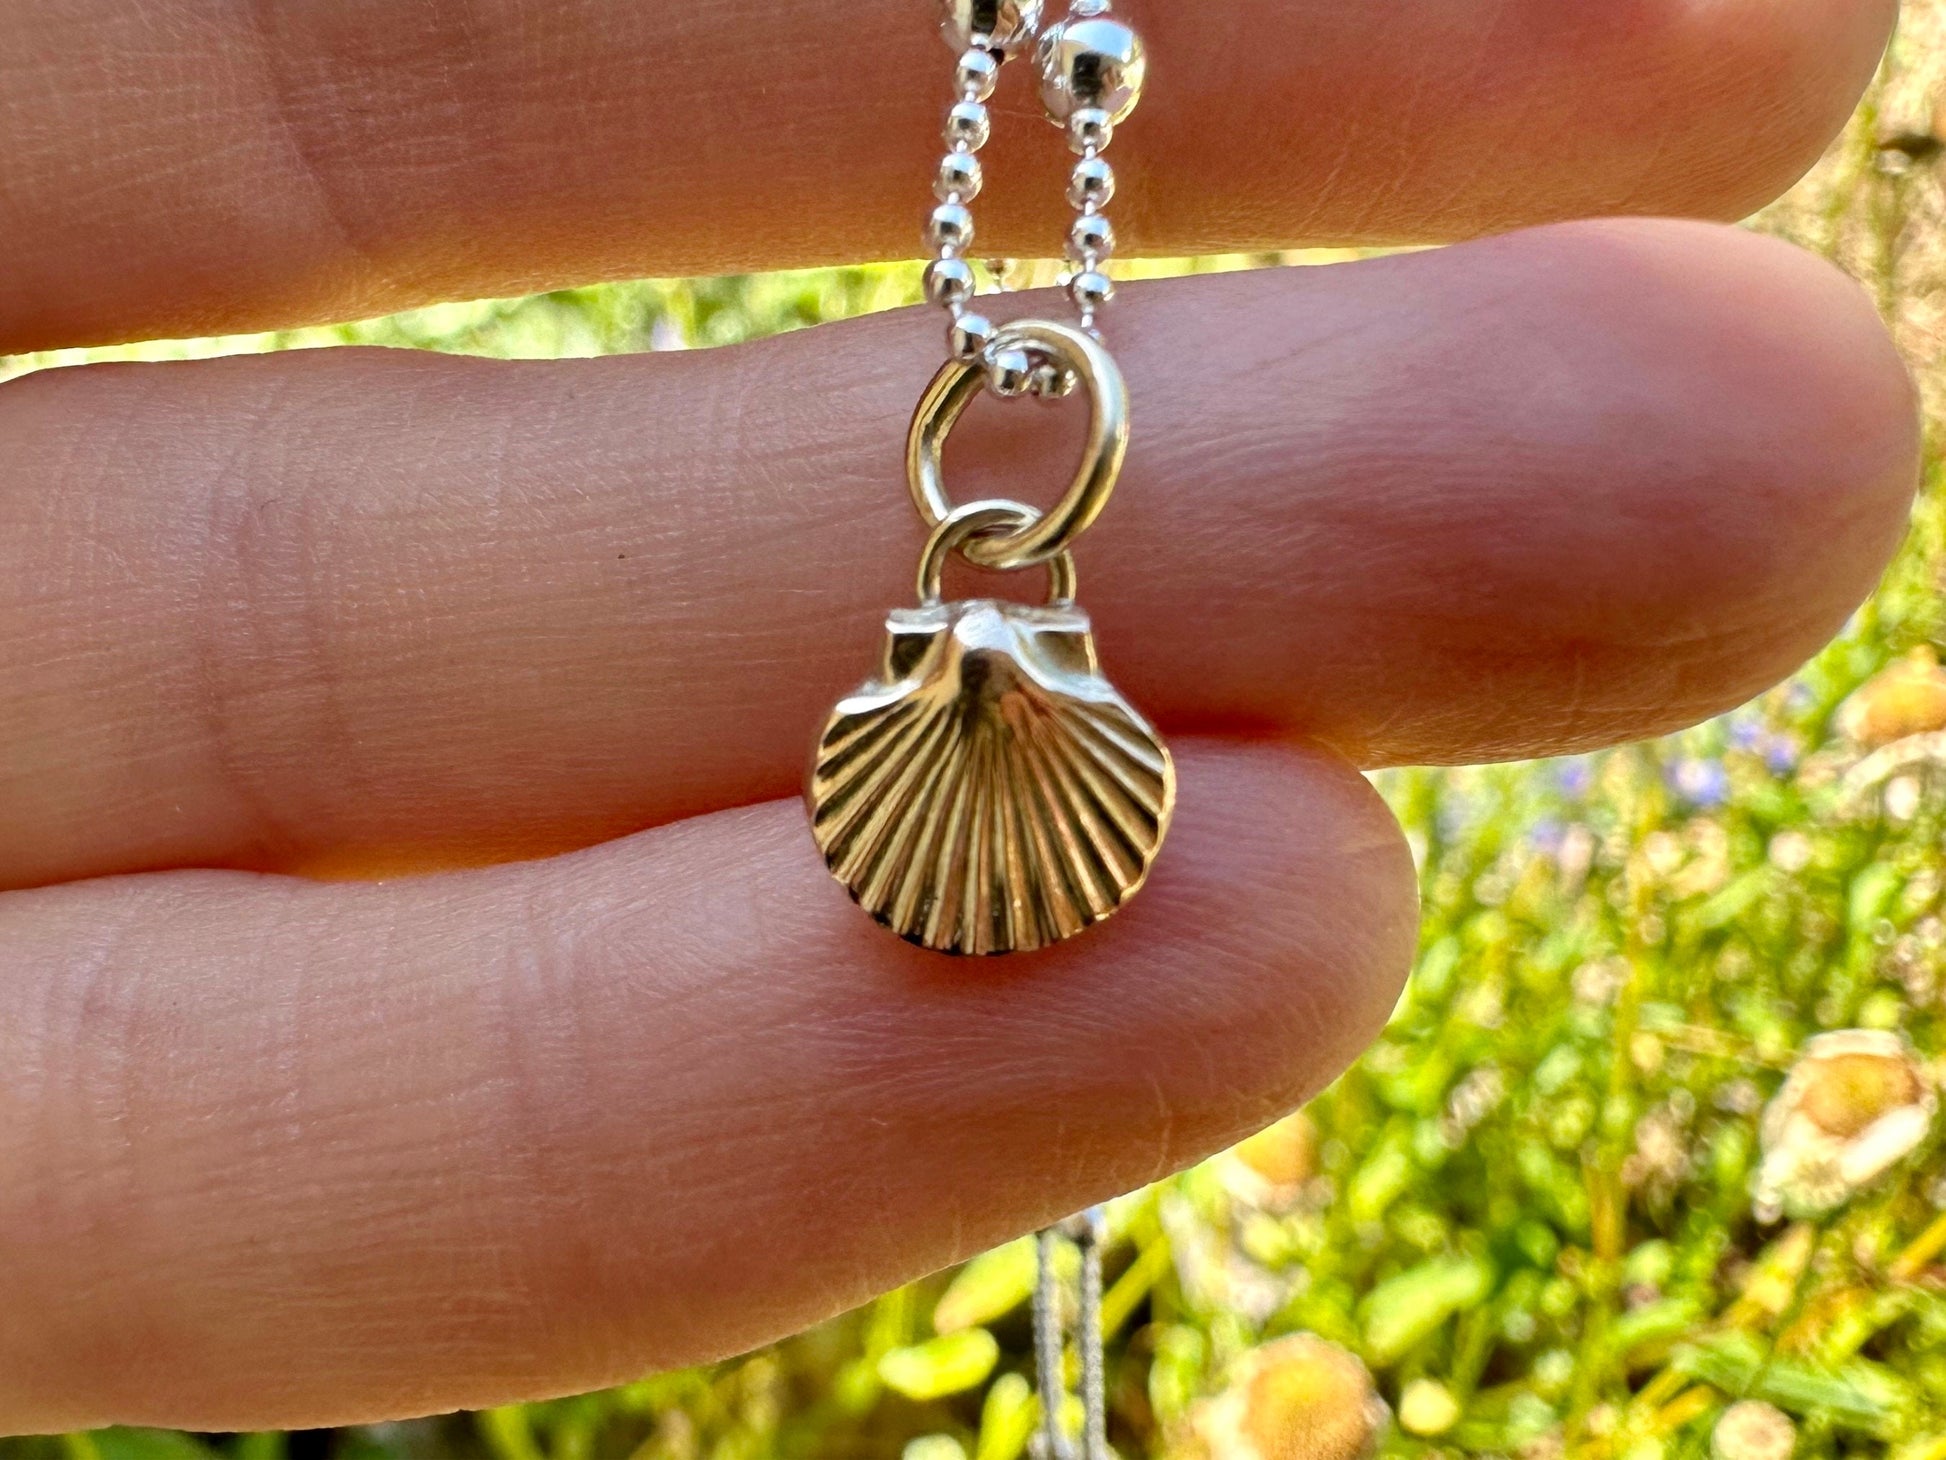 Solid 9ct gold Scallop Seashell pendant charm necklace, handmade from recycled 9ct gold, made to order